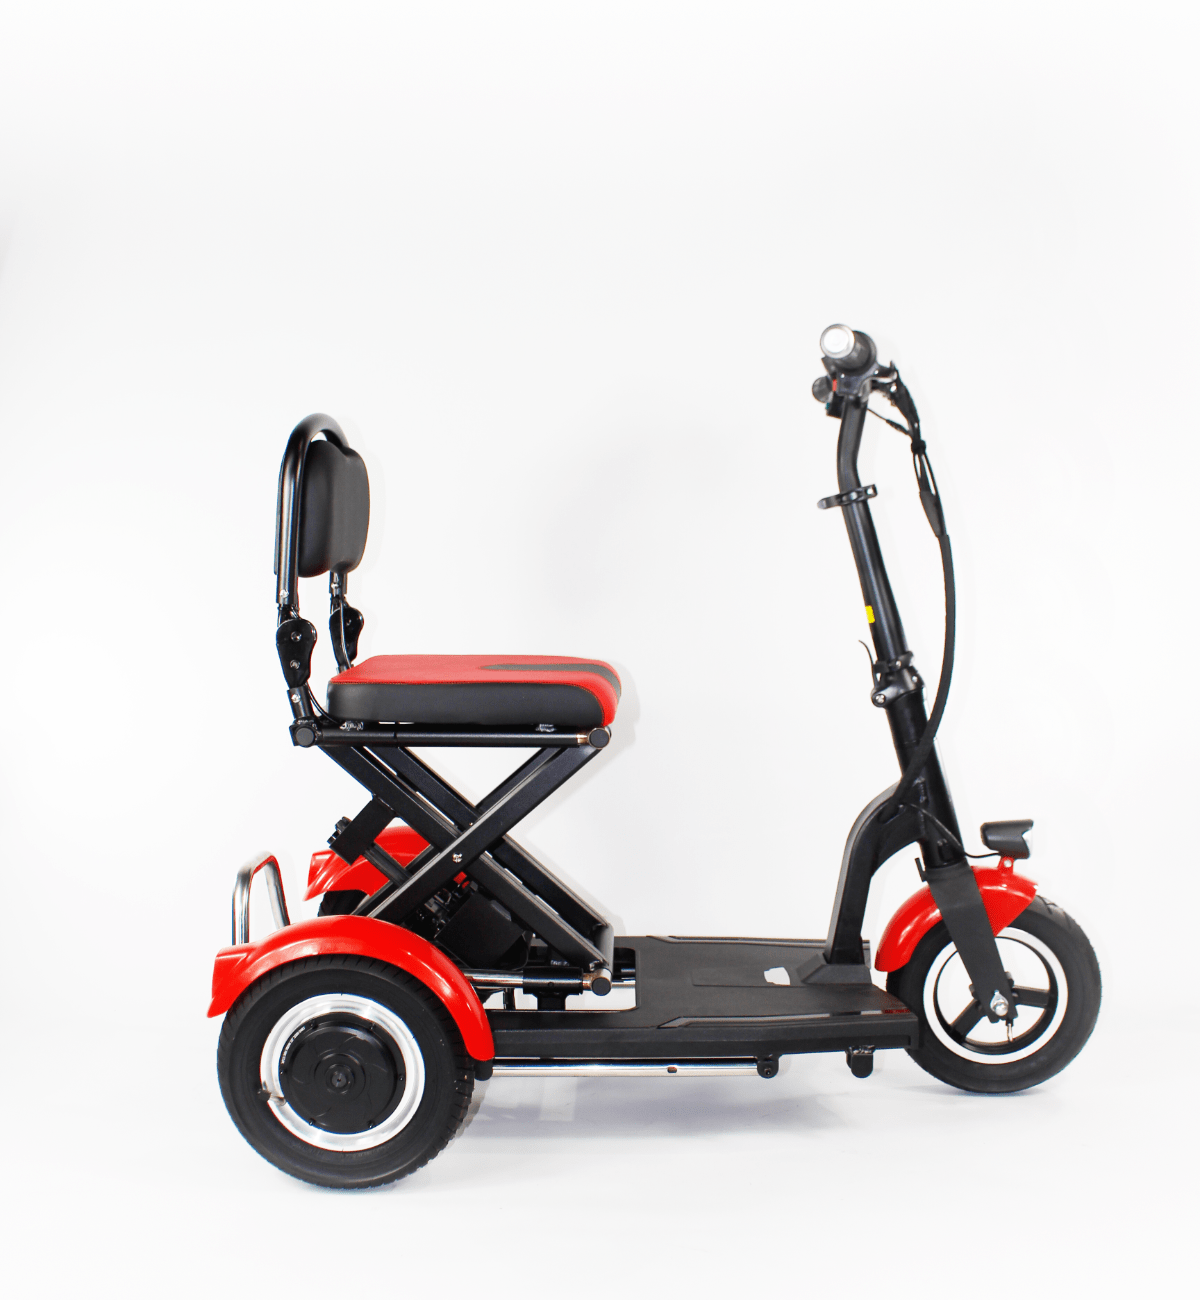 Betty&Bertie Mobility Scooters Lupin - The Folding Mobility Scooter - Red